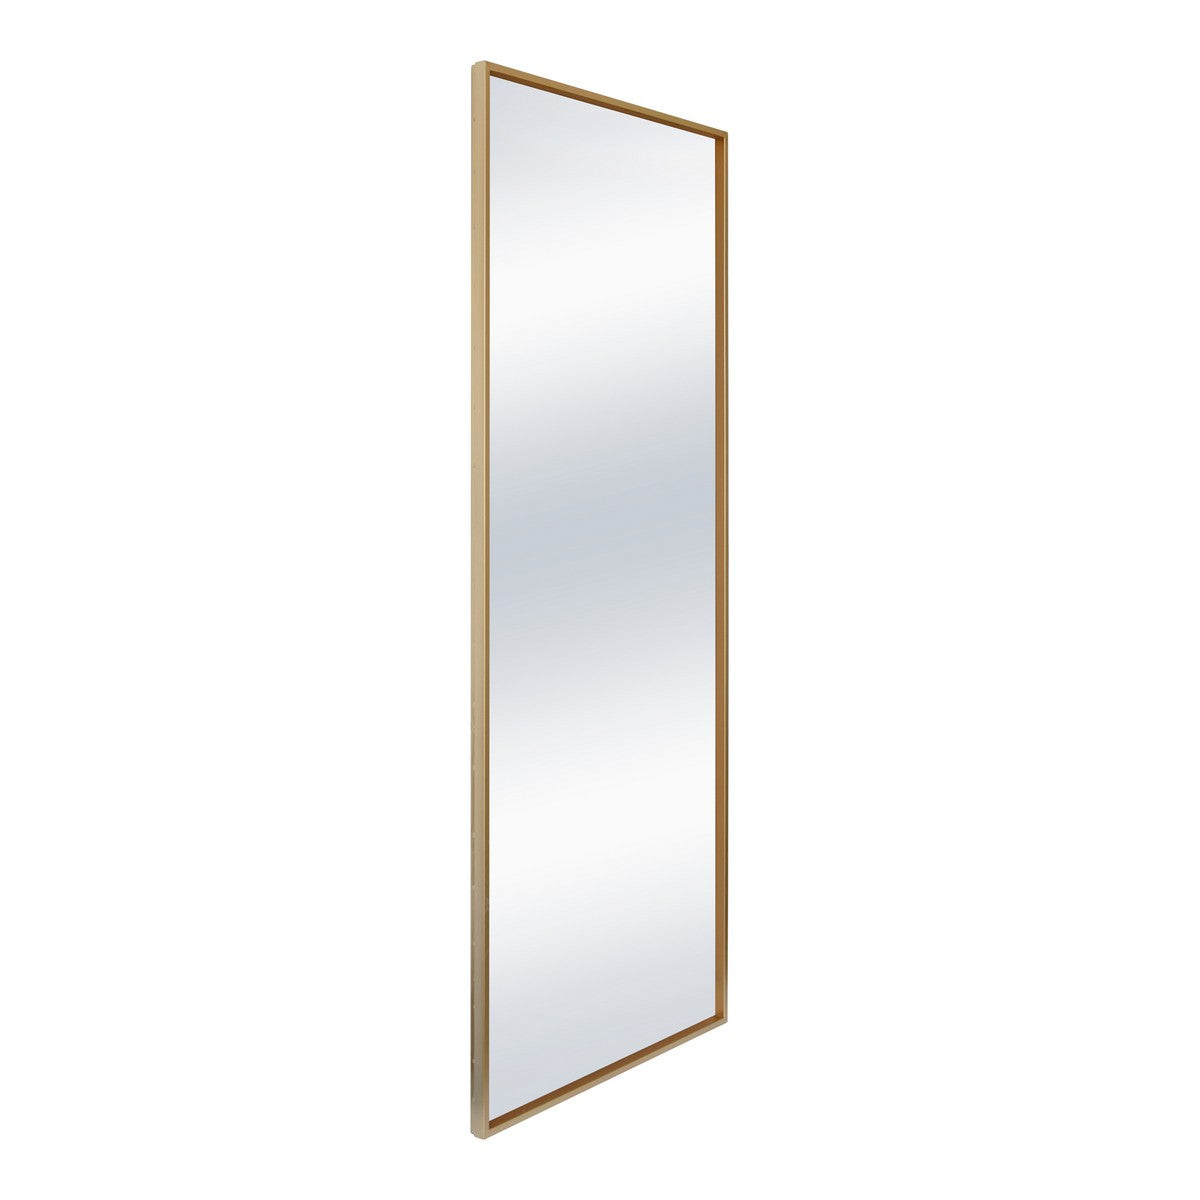 Moe's Home Collection Squire Mirror Gold - MJ-1050-32